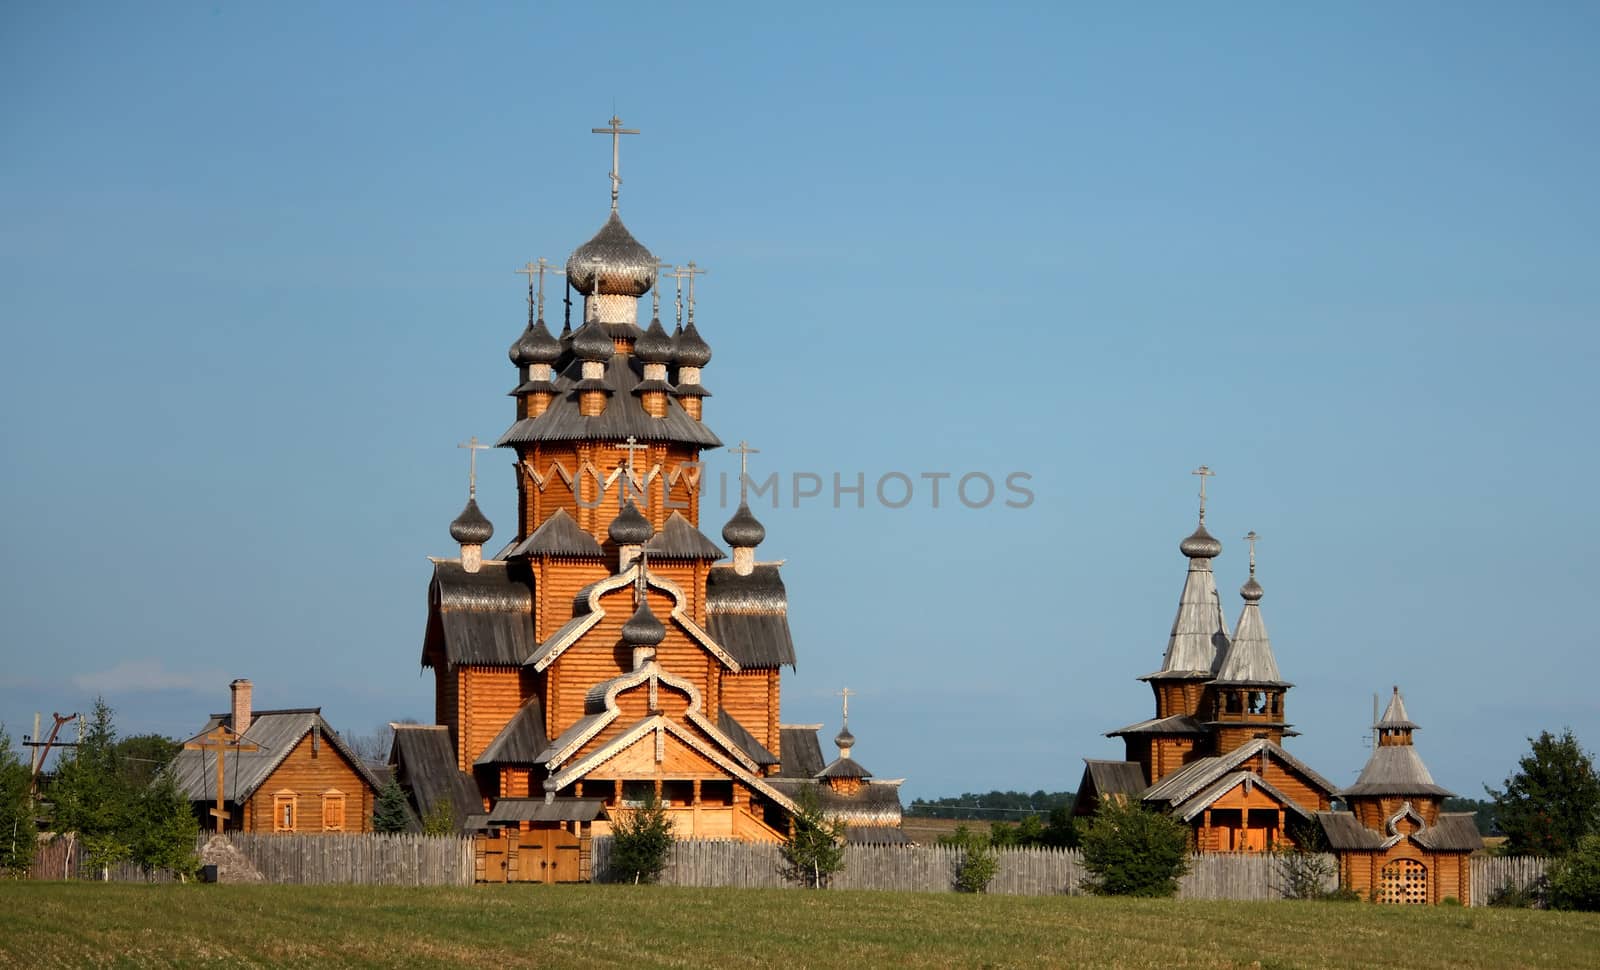 Village with traditional wooden houses and church